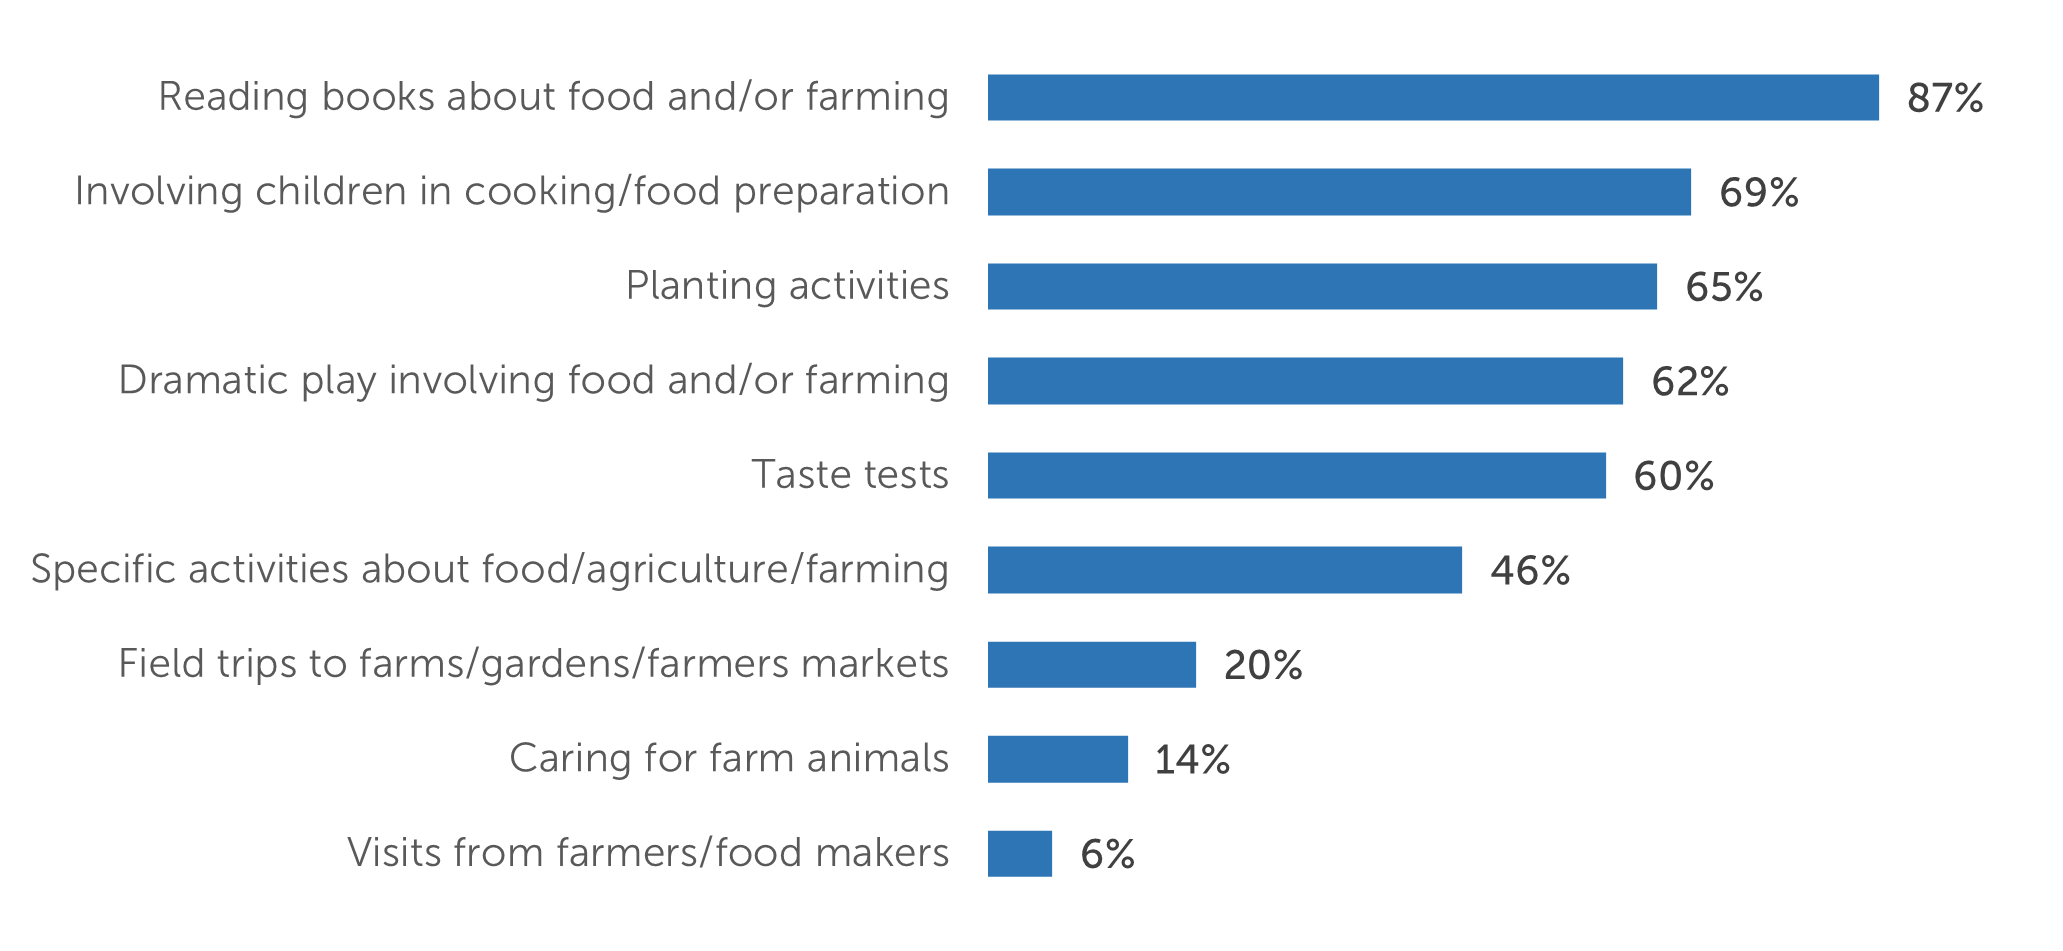 Reading books about food and/or farming: 87%; Involving children in cooking/food preparation: 69%; Planting activities: 65%; Dramatic play involving food and/or farming: 62%; Taste tests: 60%; Specific activities about food/agriculture/farming: 46%; Field trips to farms/gardens/farmers markets: 20%; Caring for farm animals: 14%; Visits from farmers/food makers: 6%